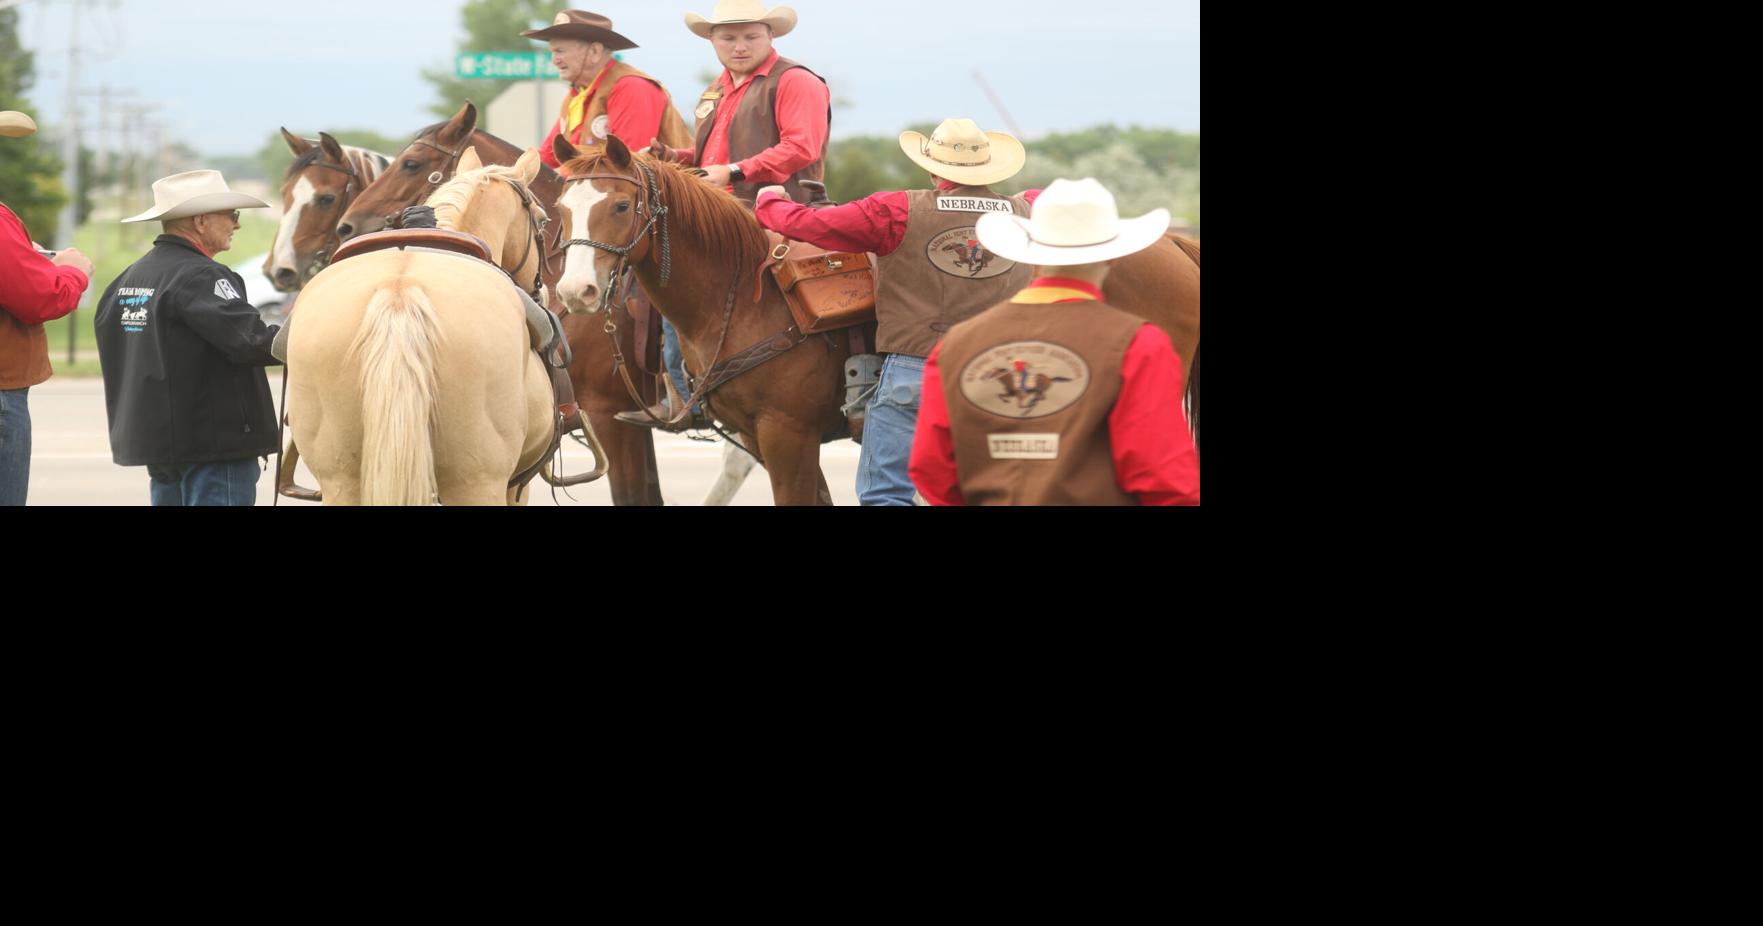 Pony Express re-ride makes its annual trip